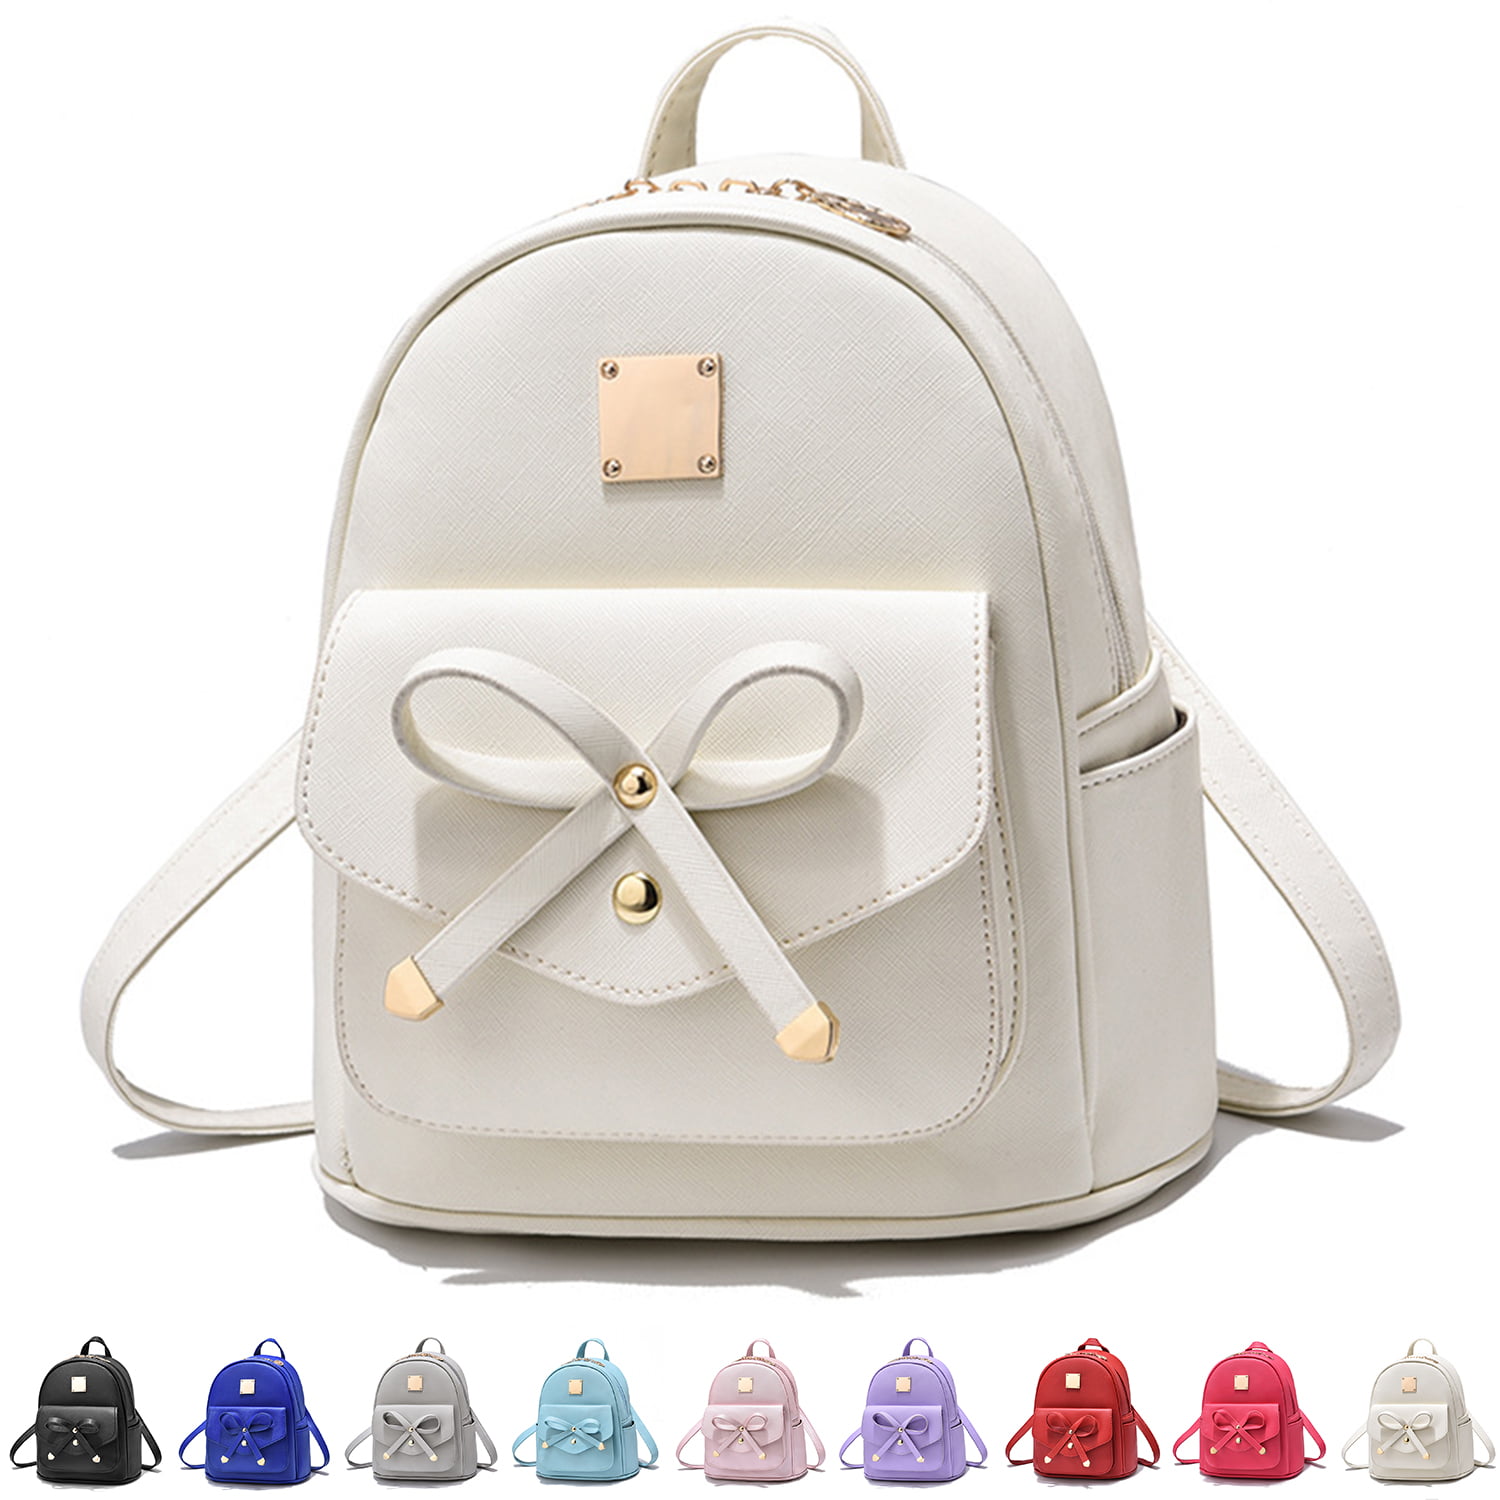 Small Backpacks for Girls and Women Synthetic Leather Fashionable Shoulder Bag Suitable for Daily Life White 466c76c6 0759 4df5 8525 9b5c424ae052.e7ec10d1e9caf3d6eb26c3c4a83e8adb